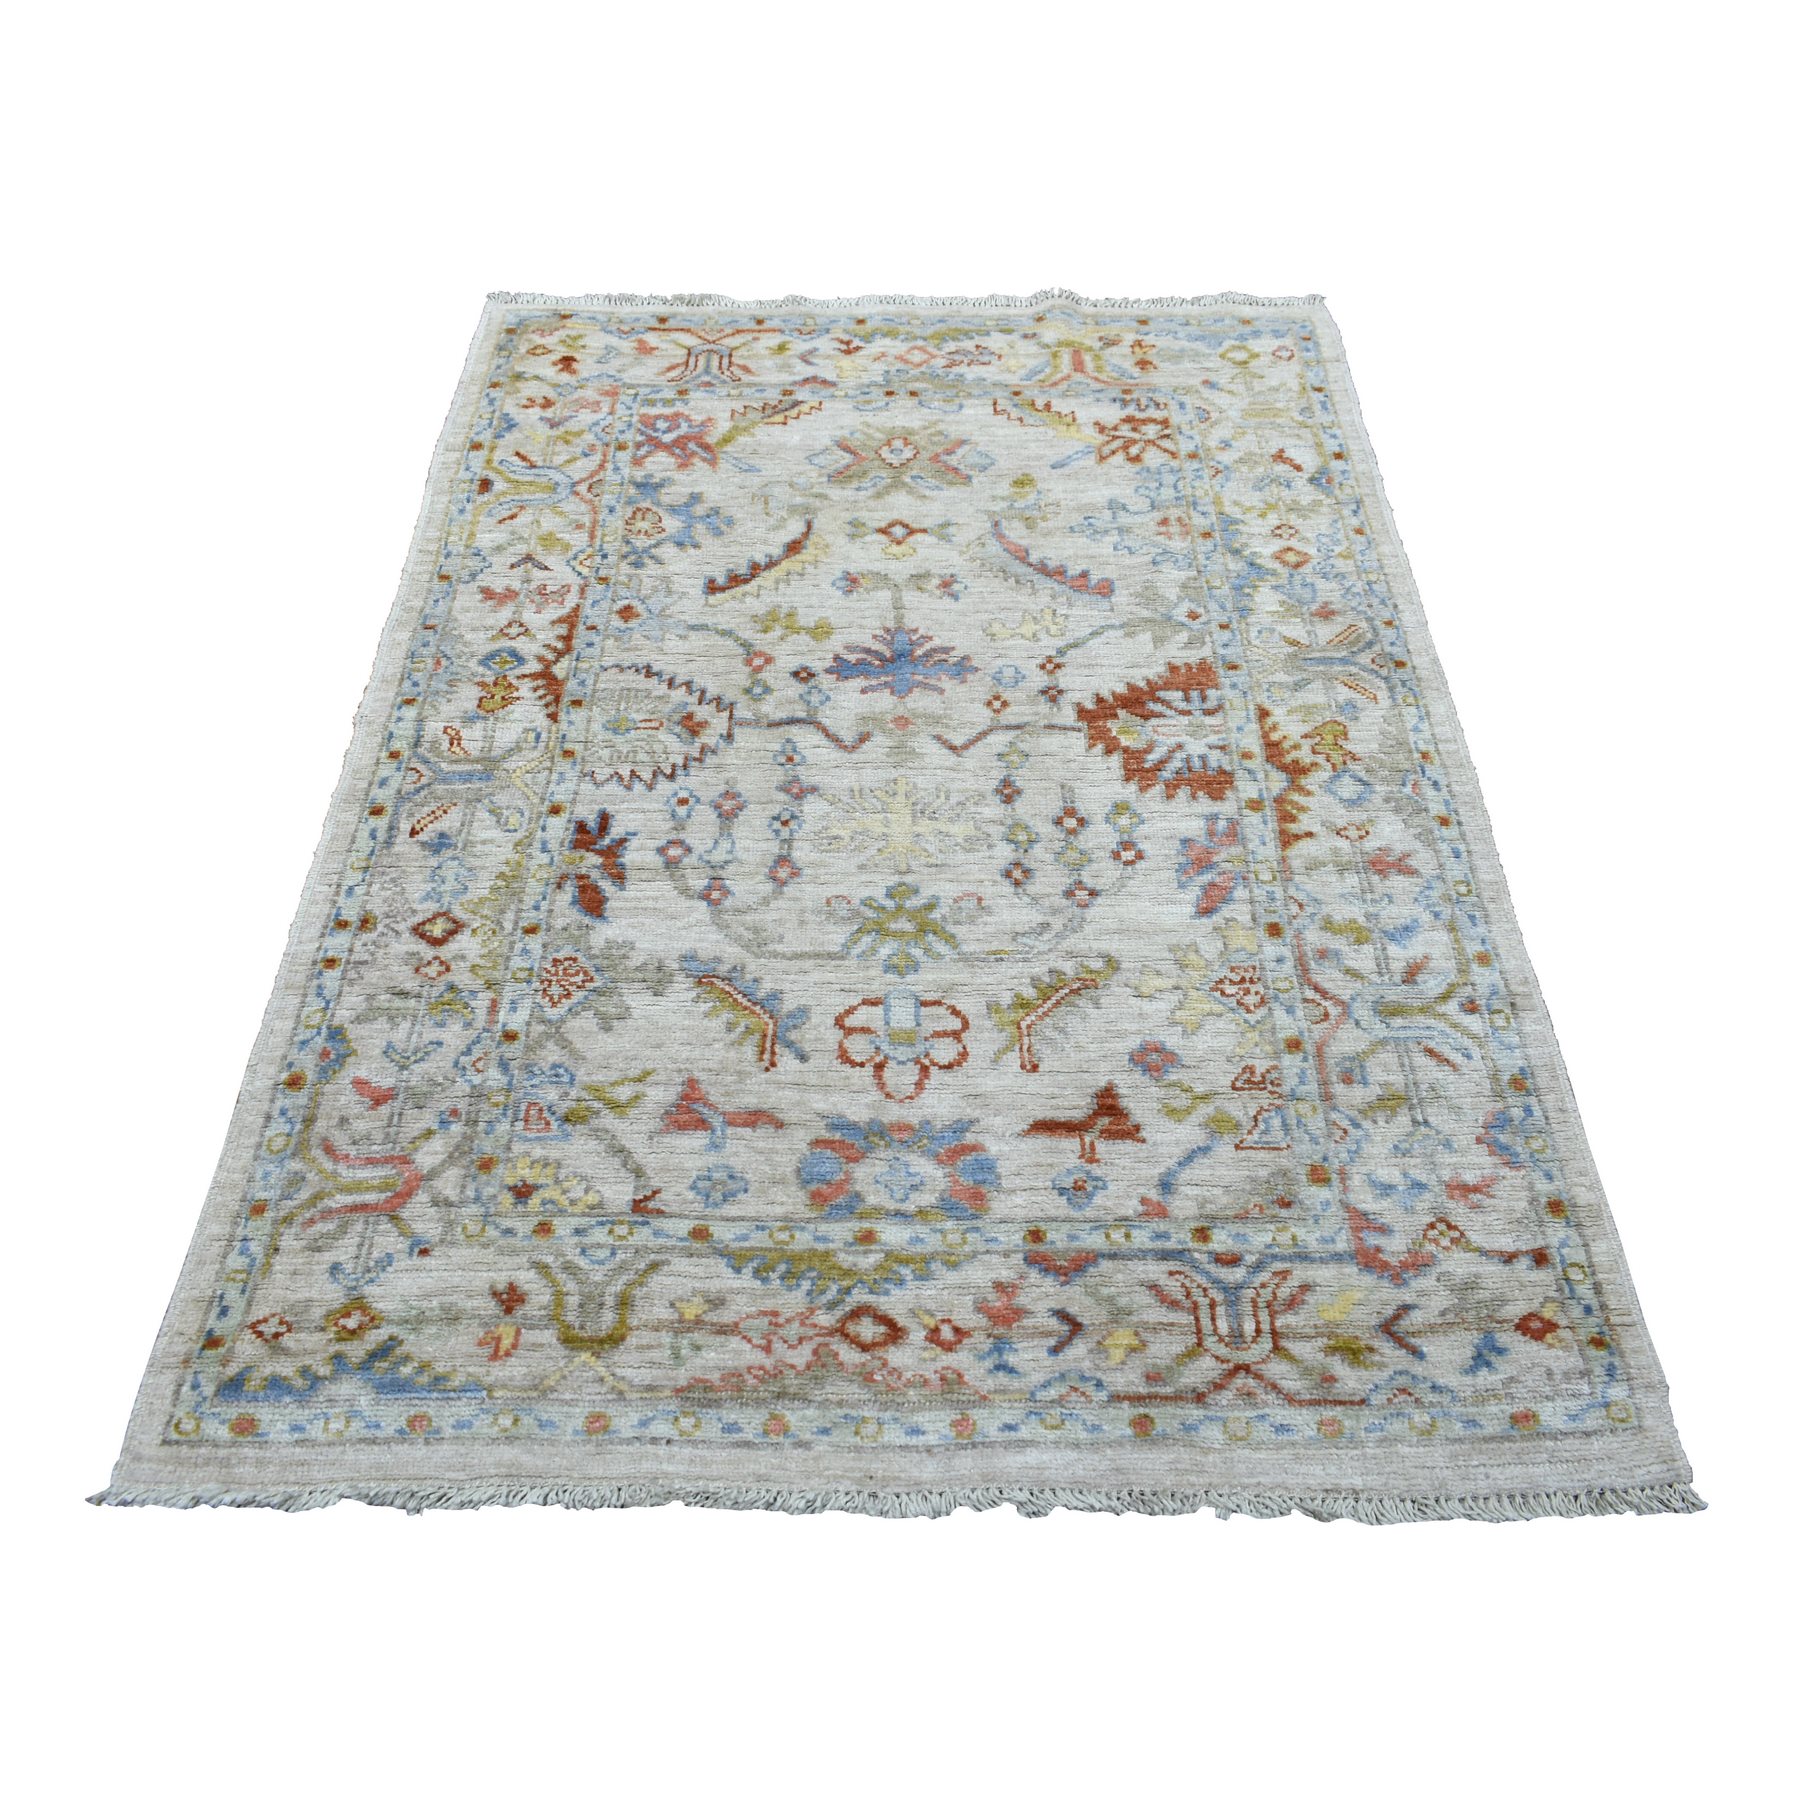 4'1"x5'10" Silver Gray Angora Ushak with Pop of Colors Soft and Pliable Wool Hand Woven Oriental Rug 